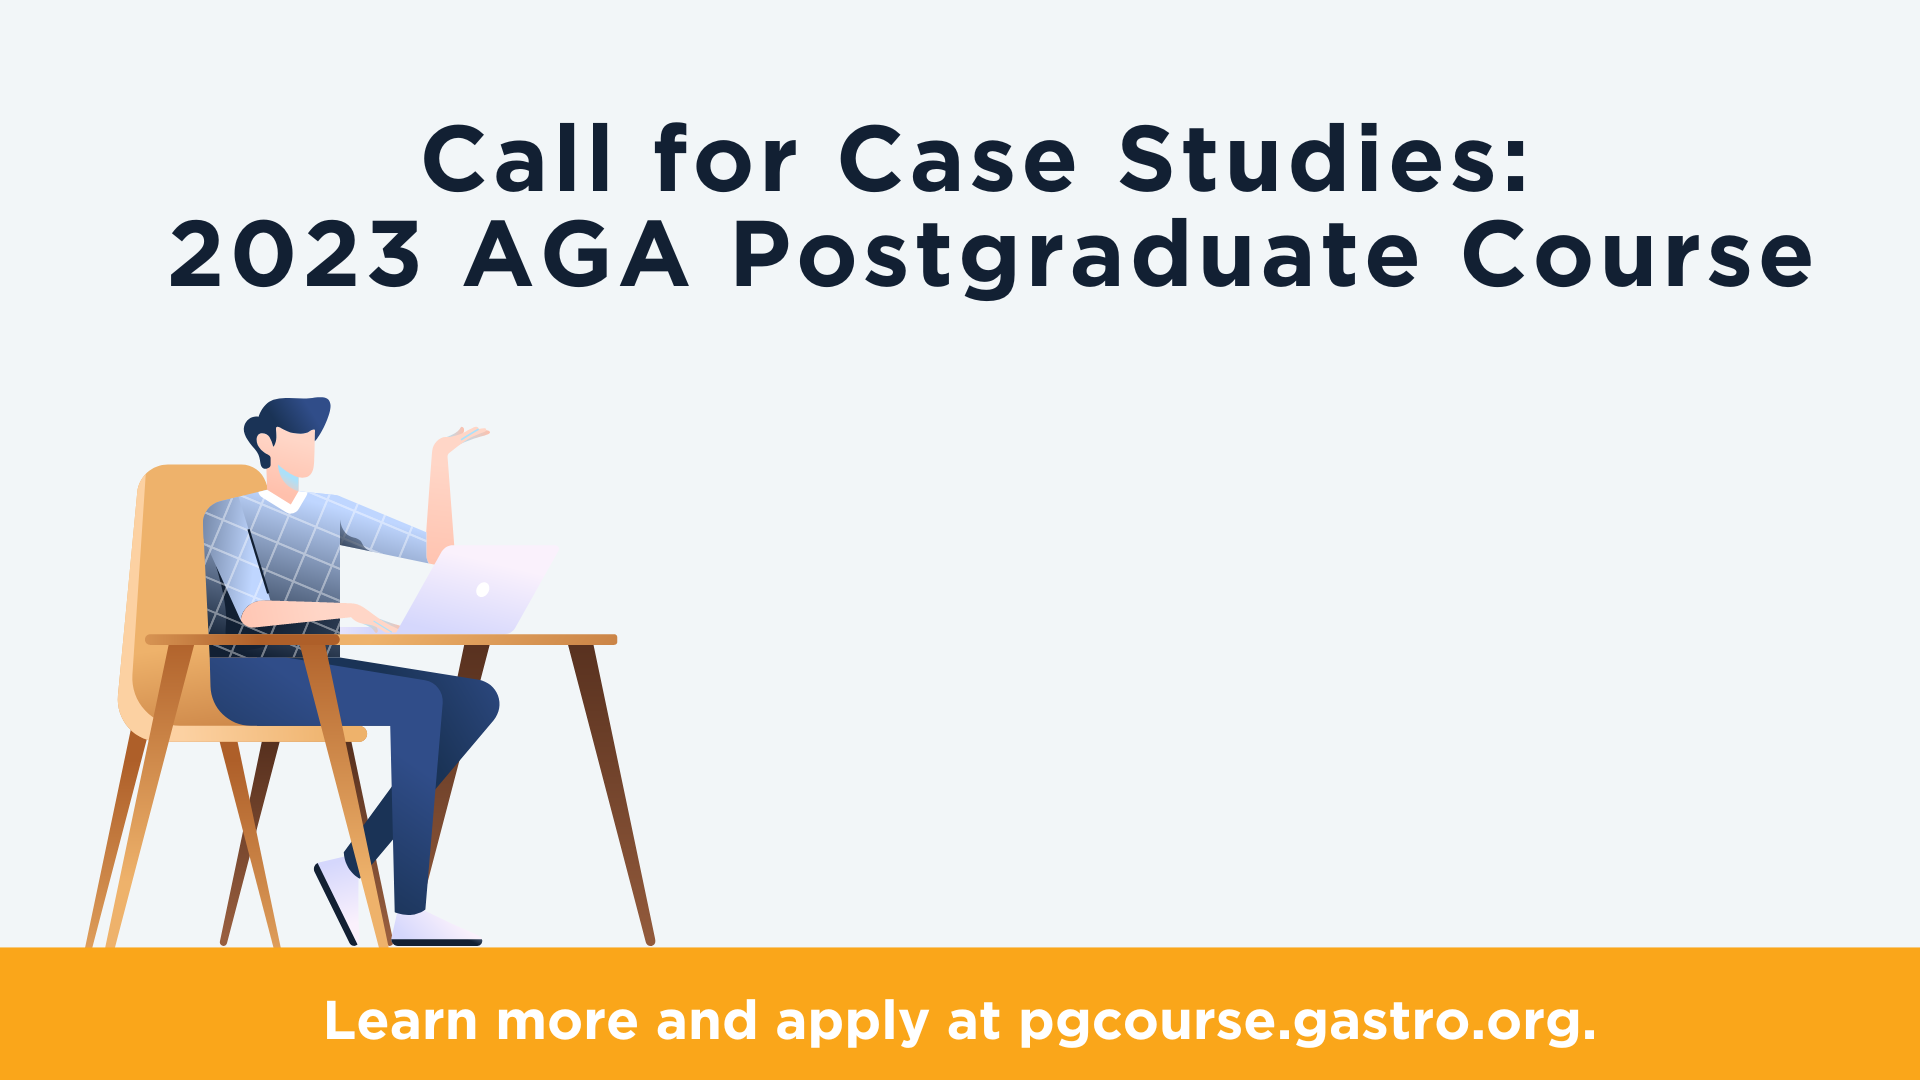 New opportunity for early career GIs at the AGA Postgraduate Course